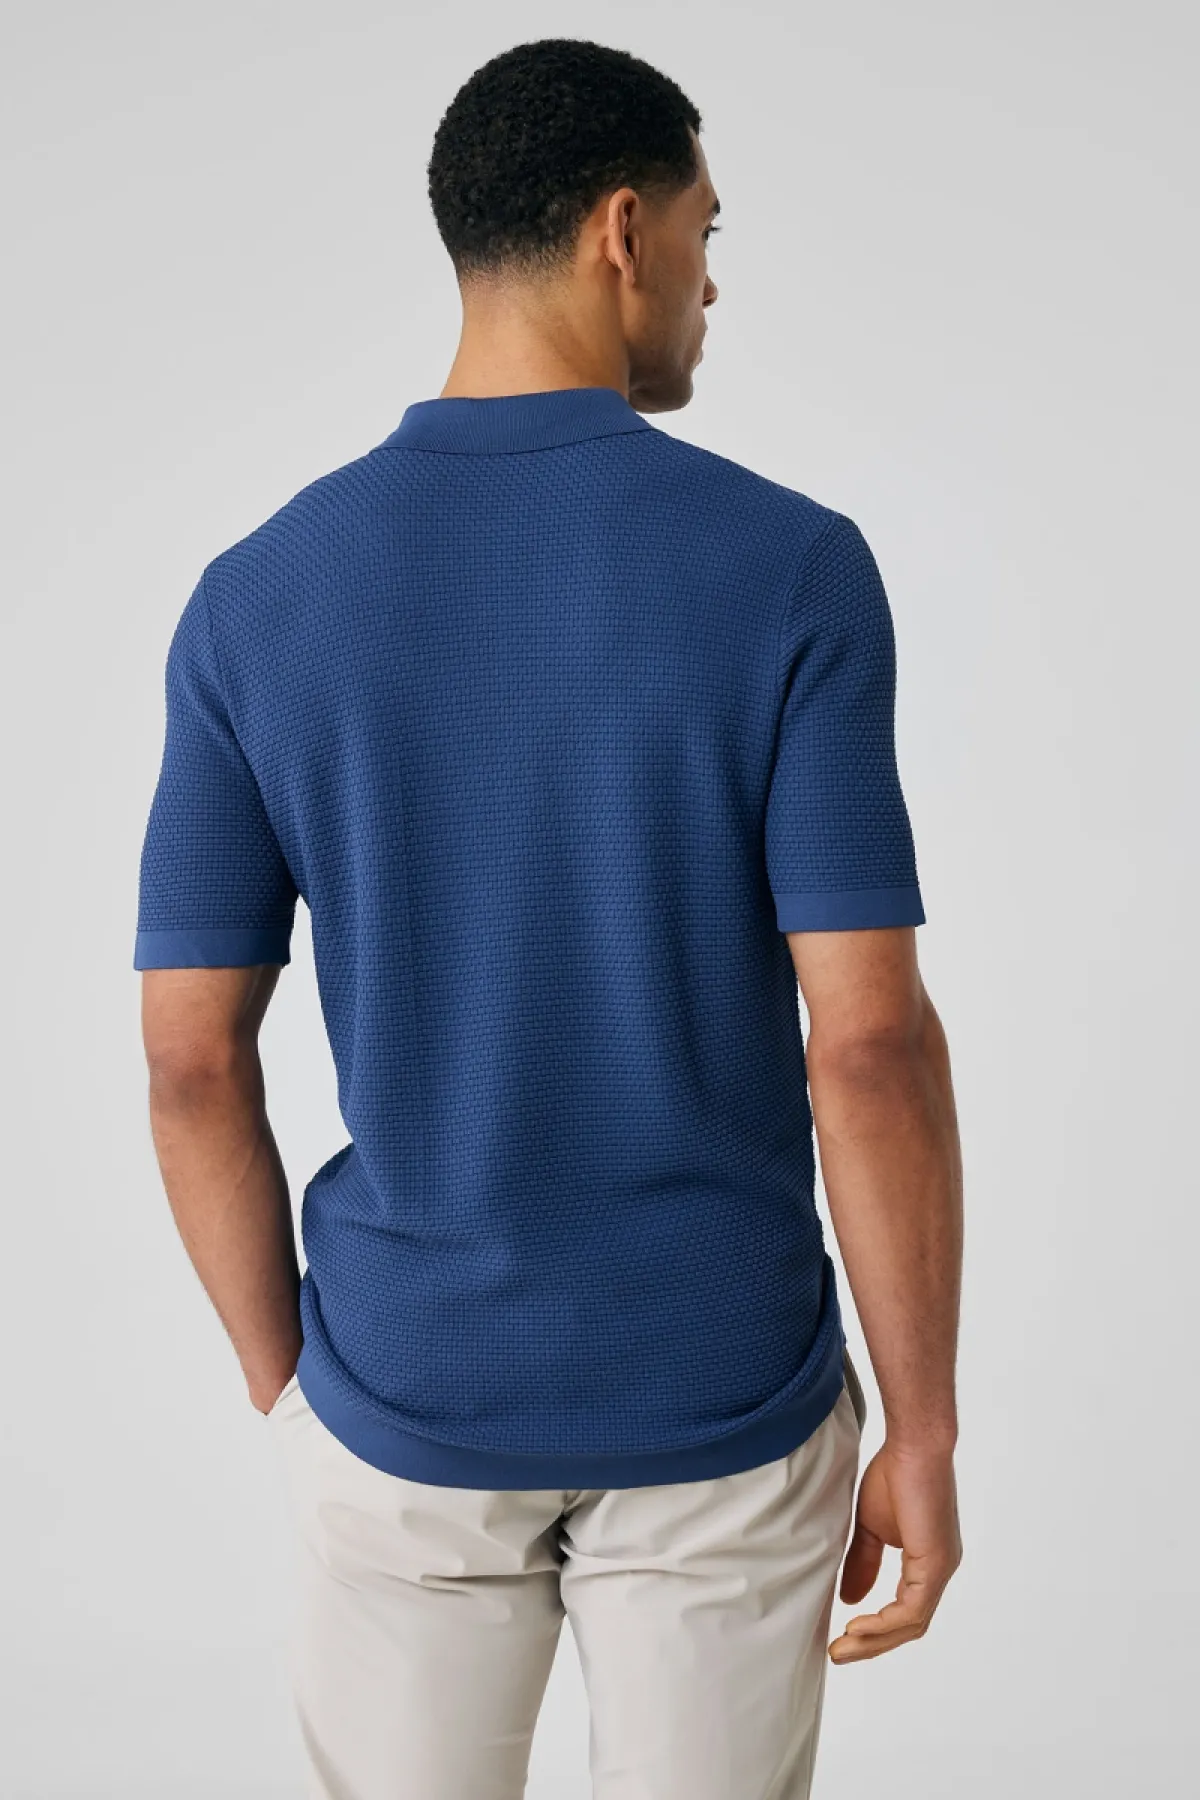 Blauwe cool dry structuur polo